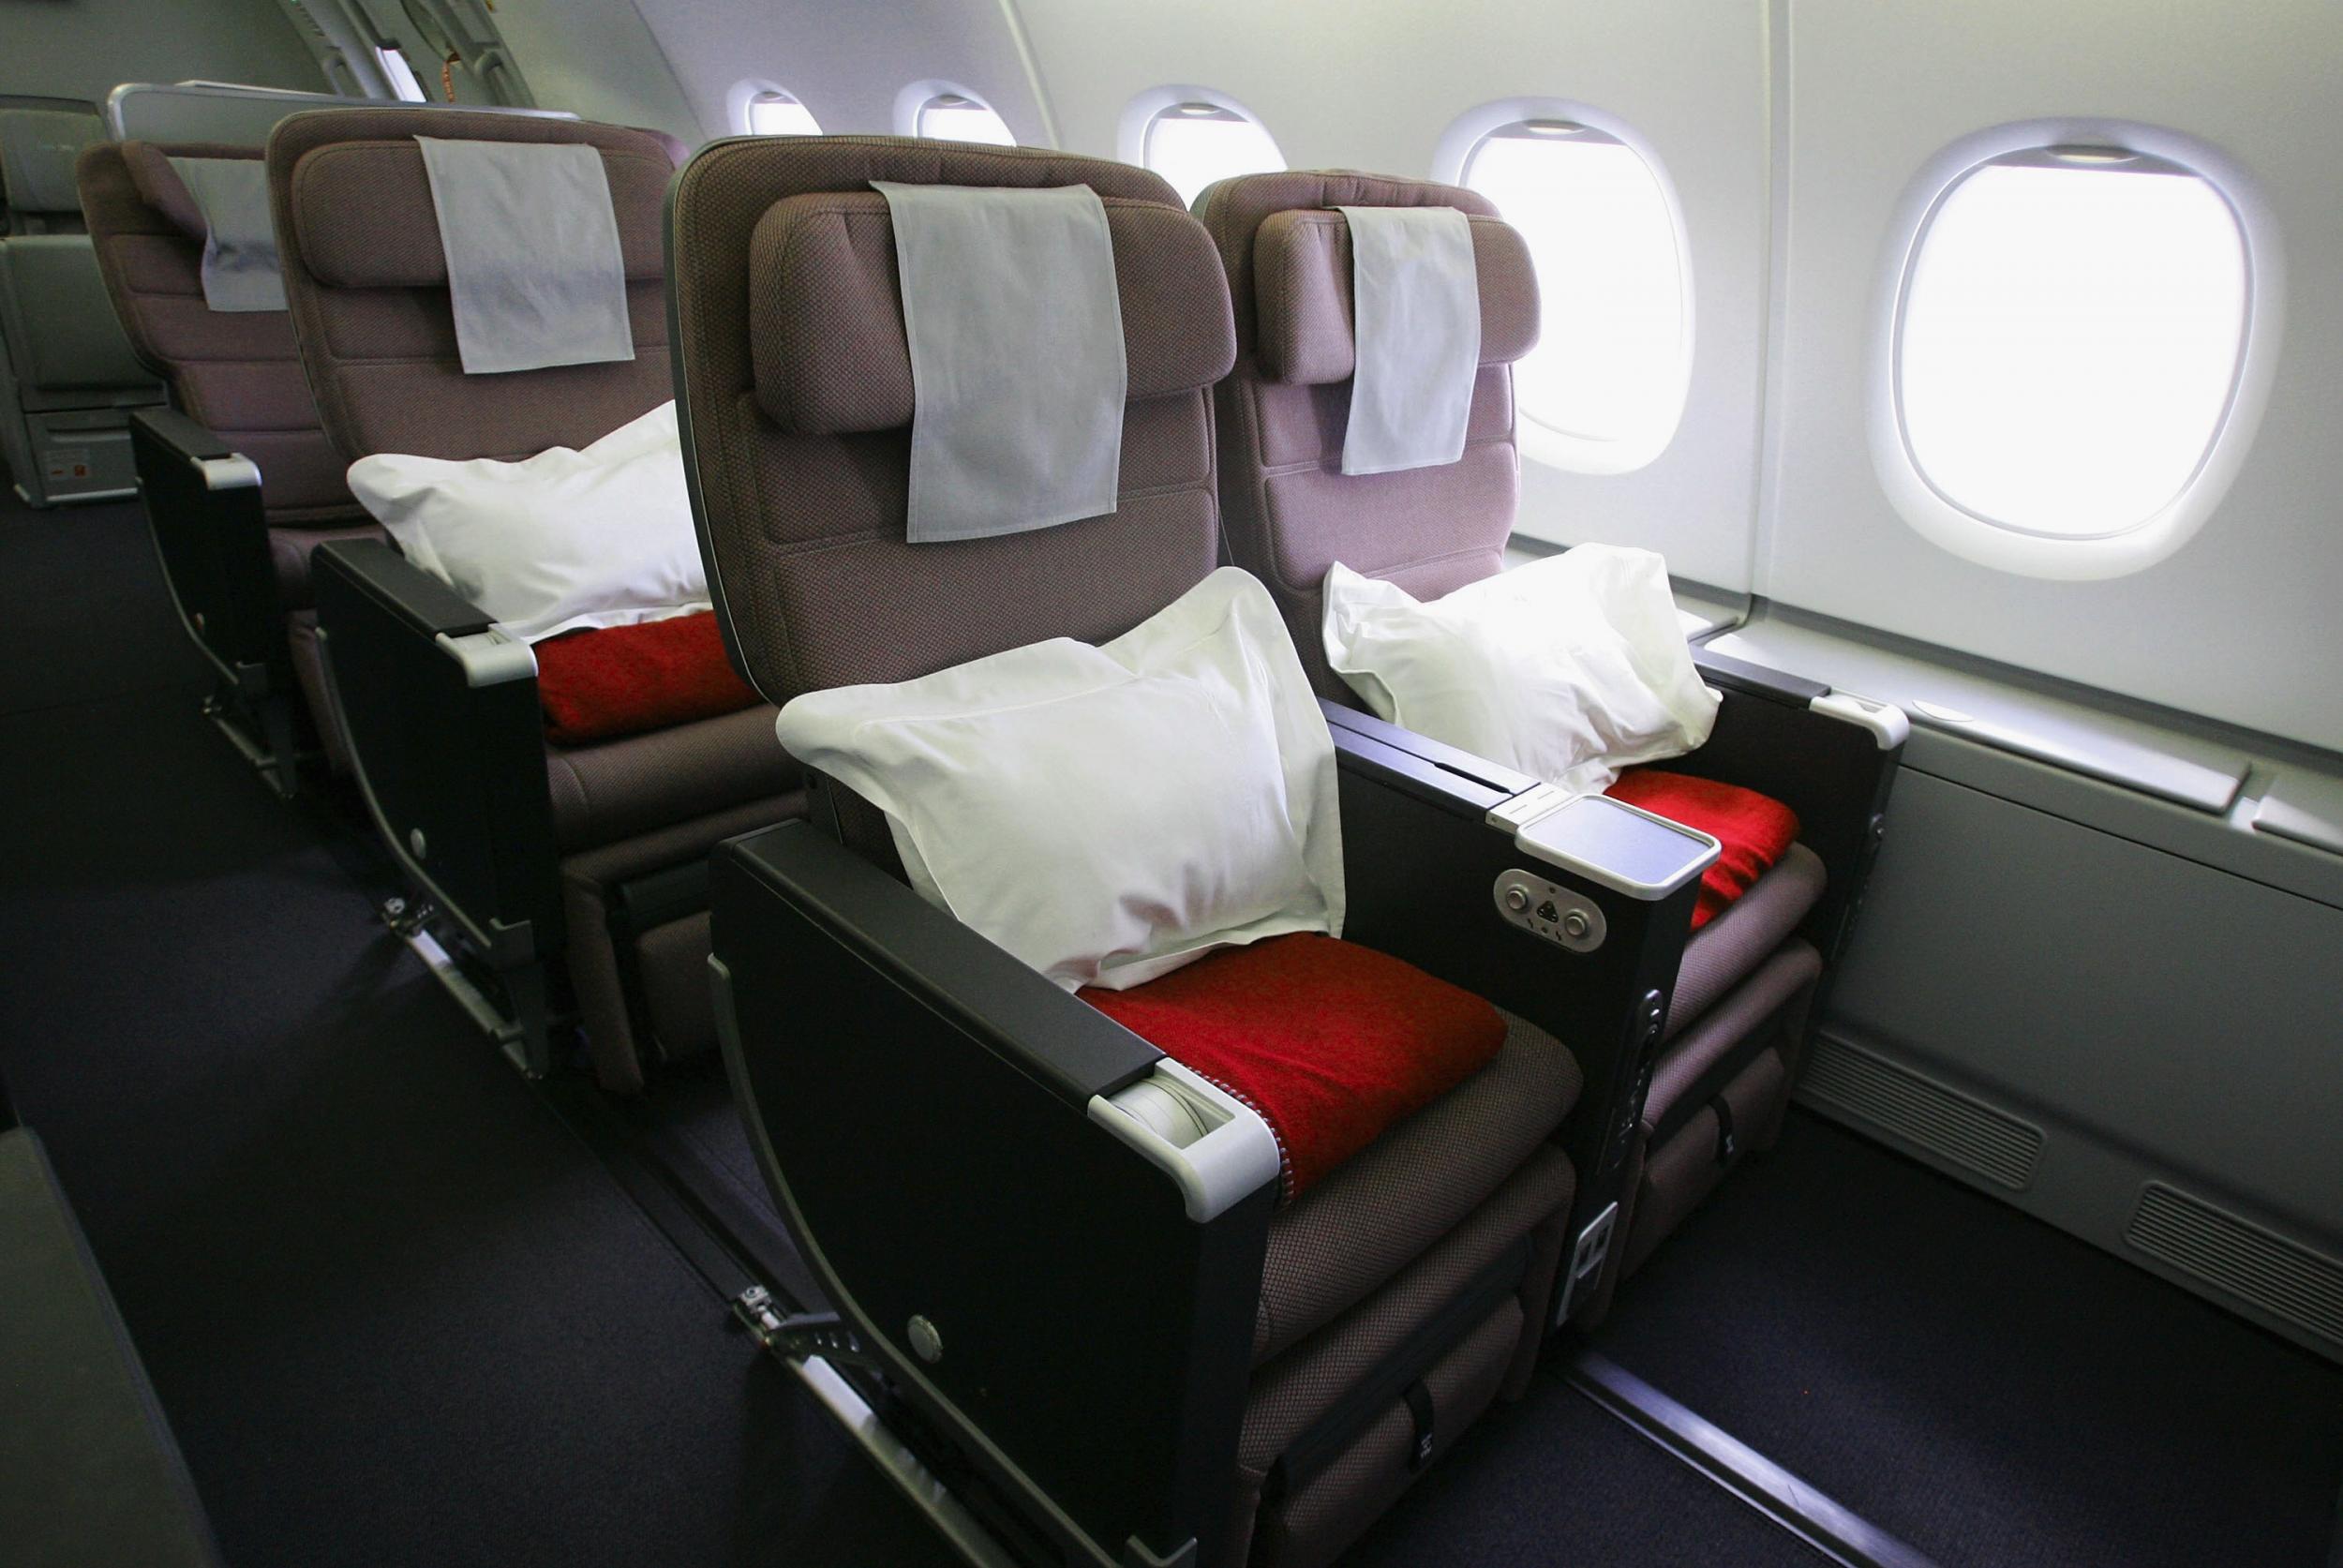 Choose your flight carefully and you could find yourself with extra space on board